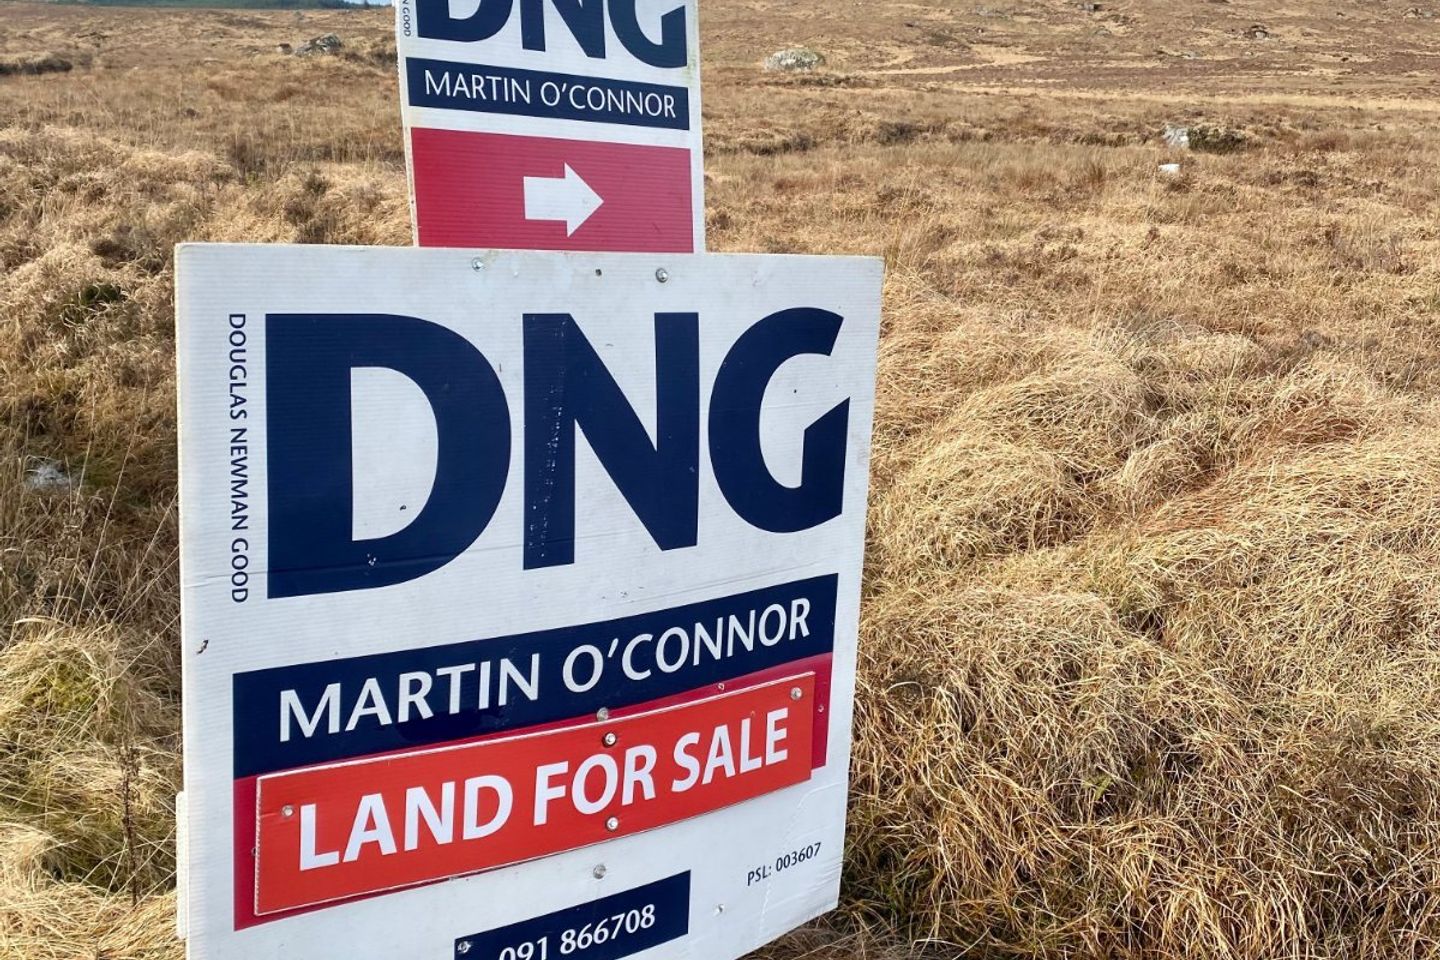 Lot 2, Rusheeny, Oughterard, Co. Galway